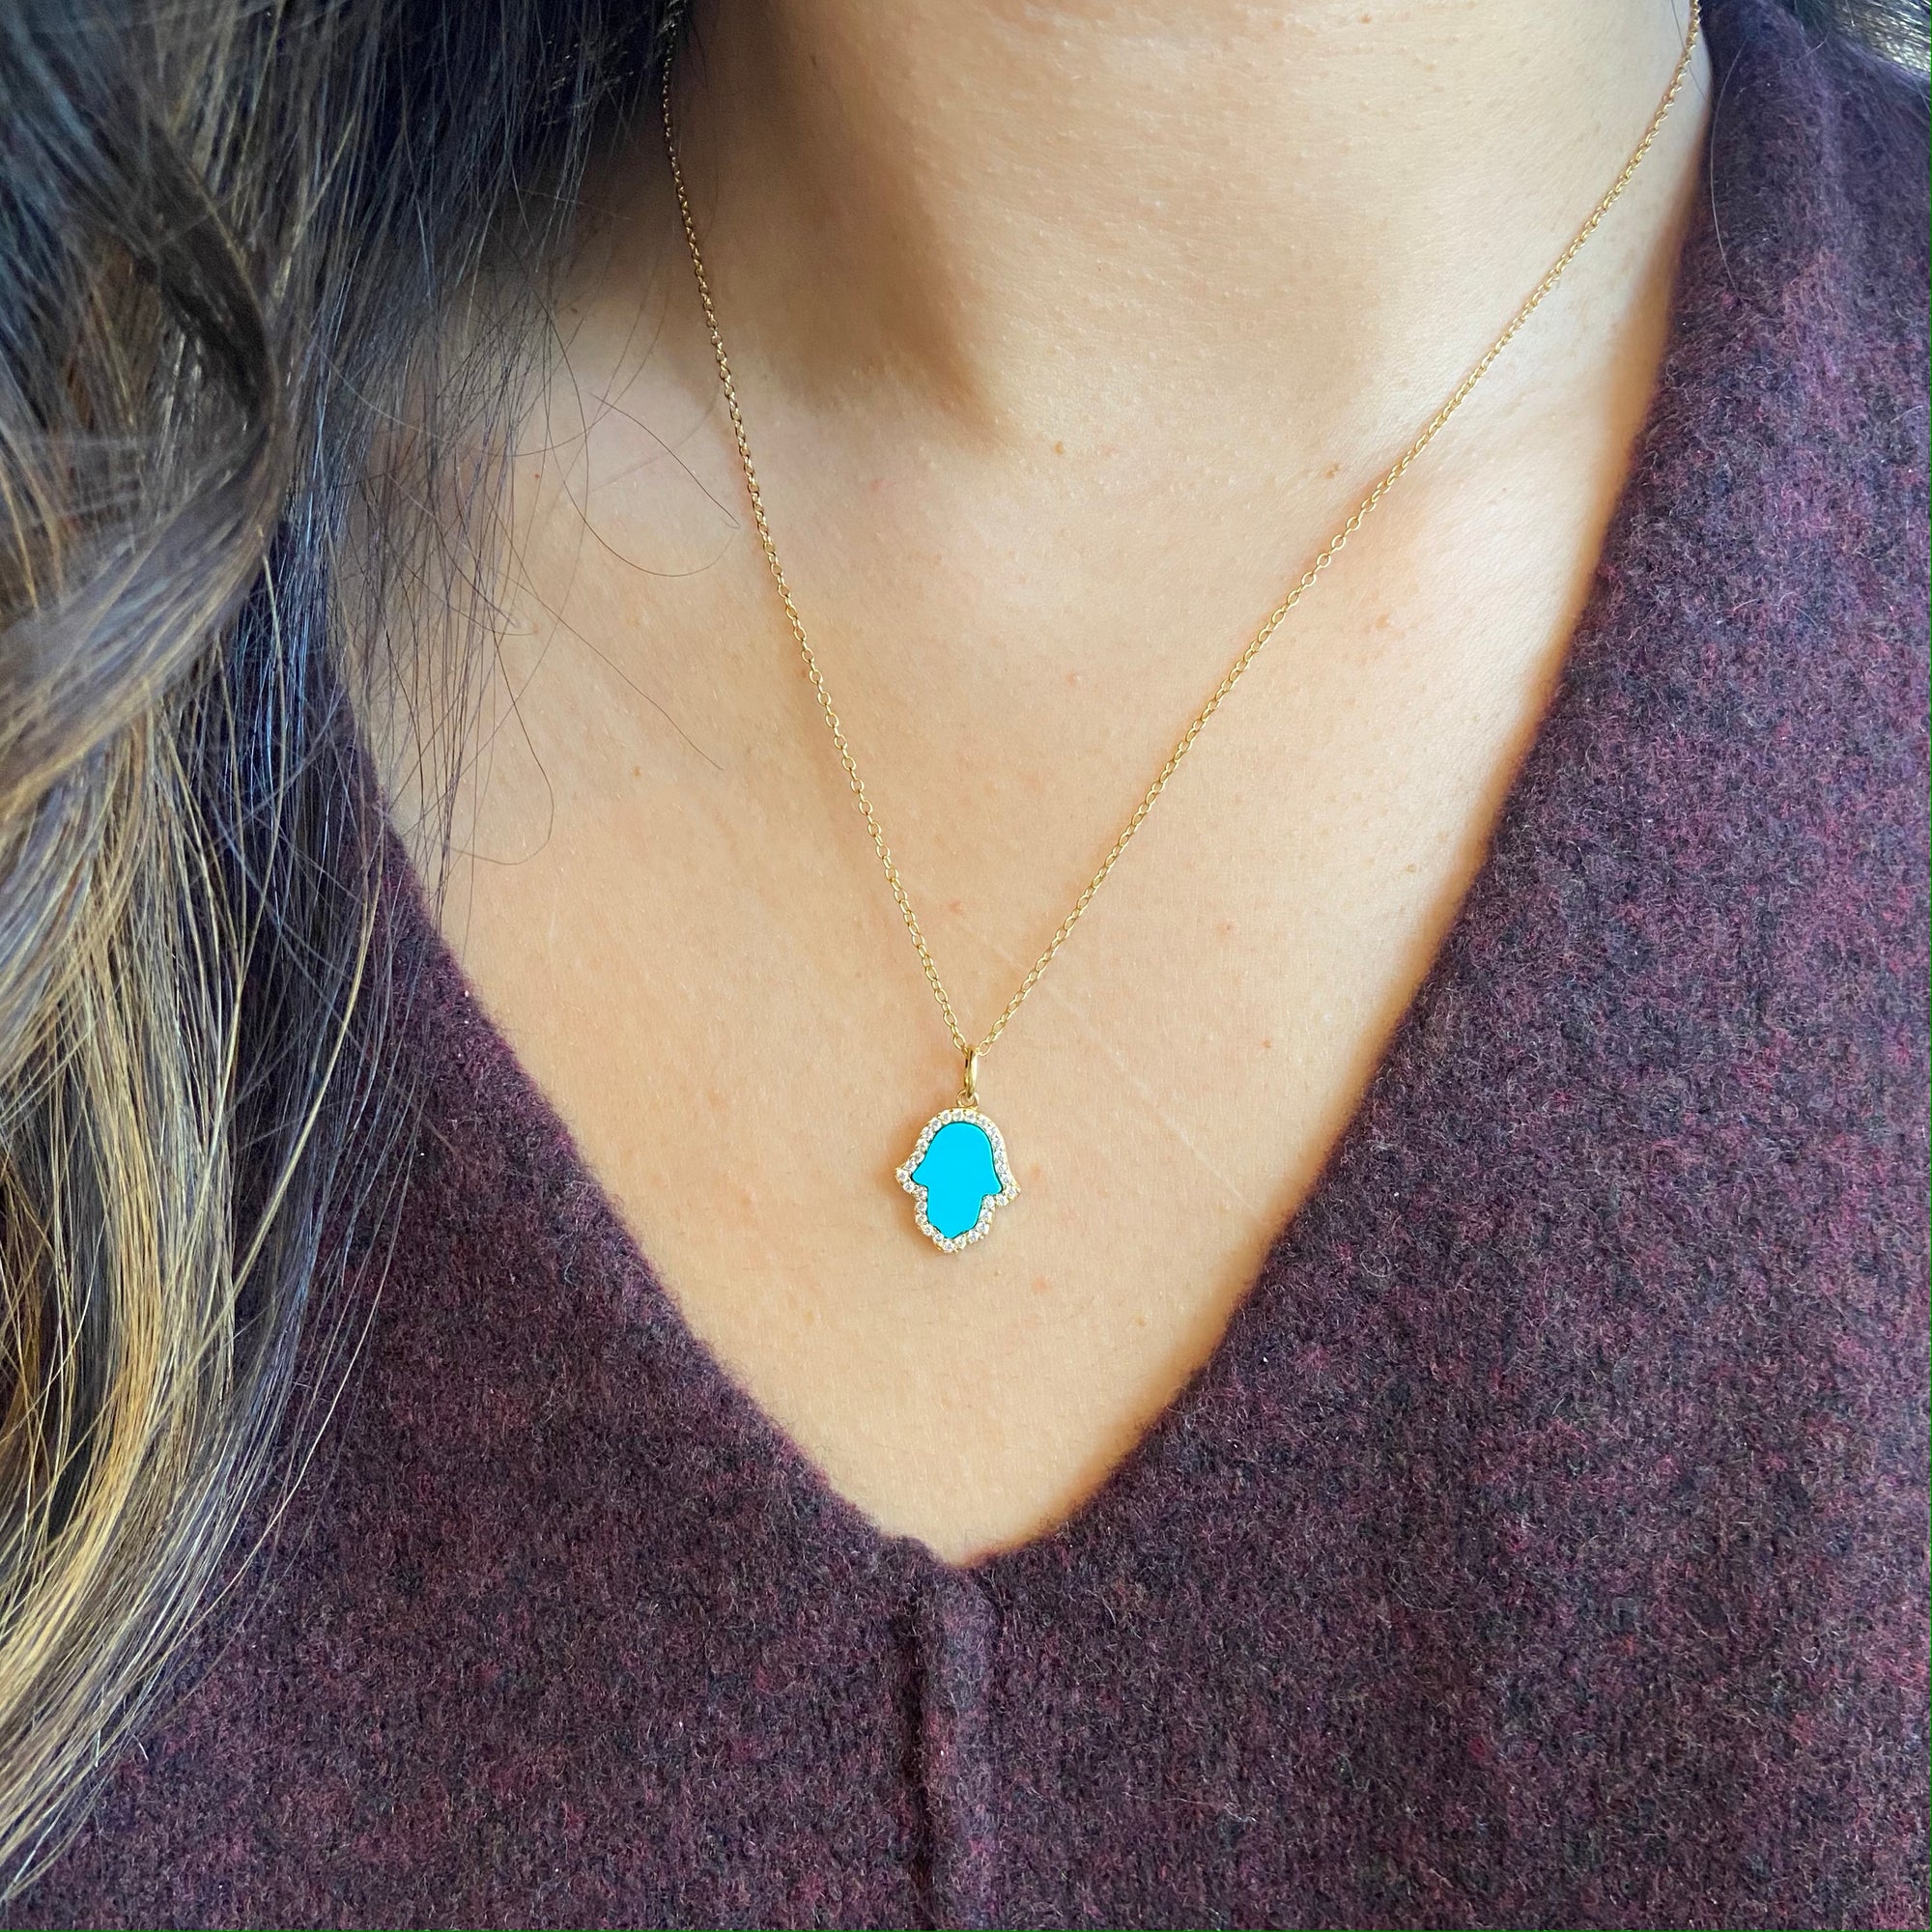 Hamsa Hand Necklace in Turquoise